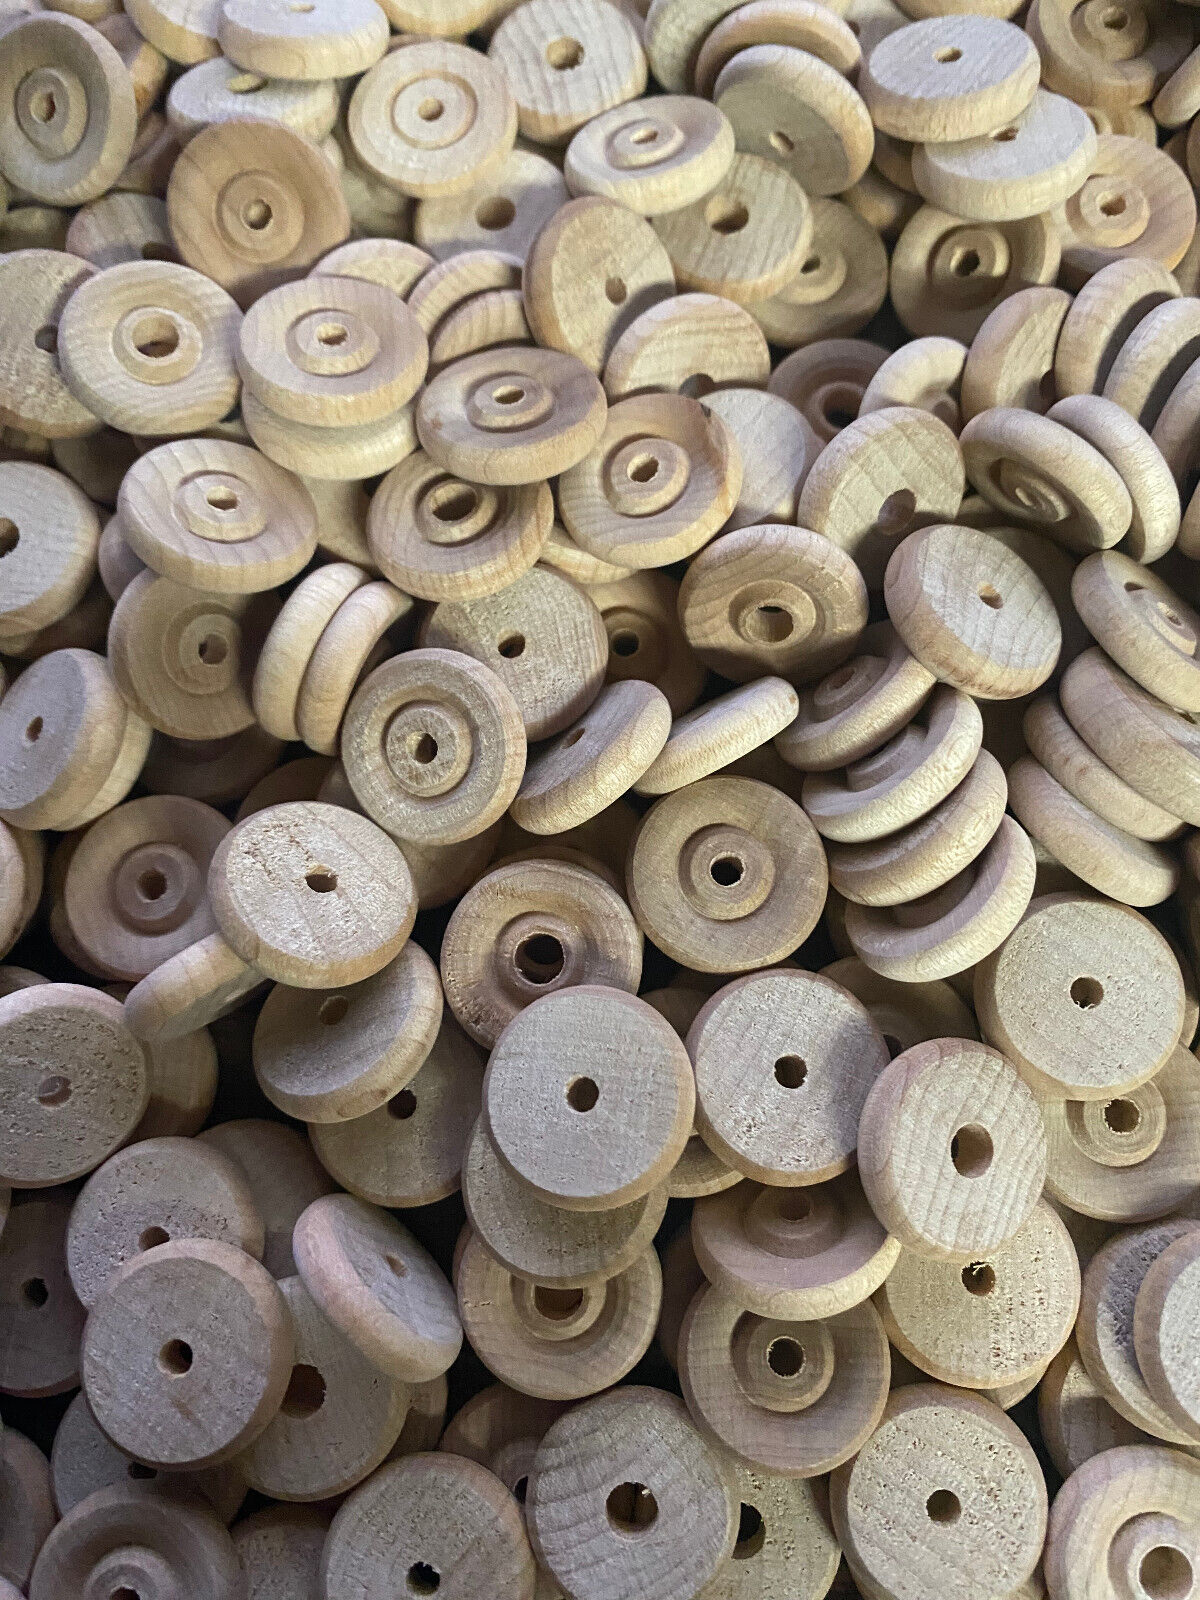 100 Natural 3/4'' Wood Wheels With 1/8'' to 1/4'' Hole- Bird Toy Parts Naynay39 bird toy parts